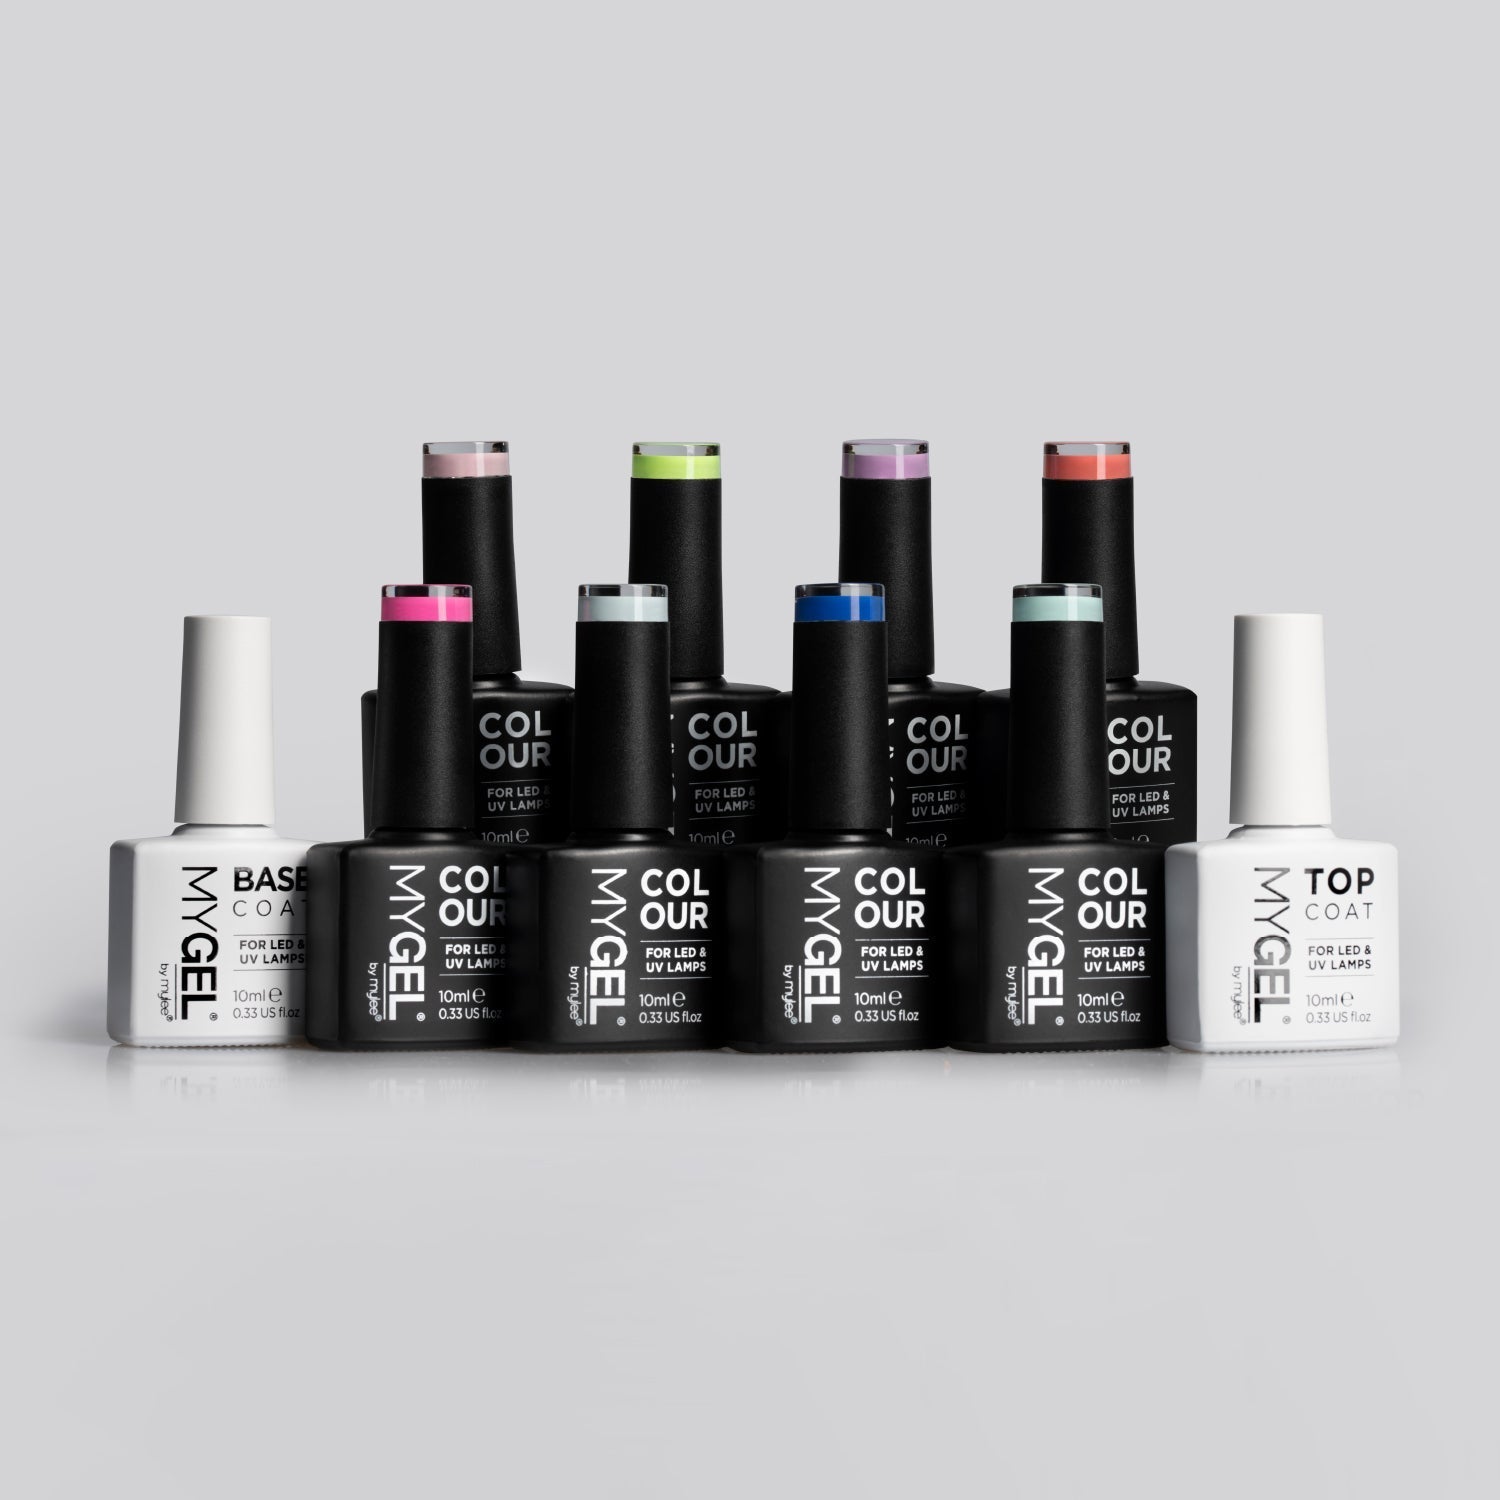 Mylee Spring Summer Colour LED/UV Gel Nail Polish Collection - 10x10ml – Long Lasting At Home Manicure/Pedicure, High Gloss And Chip Free Wear Nail V